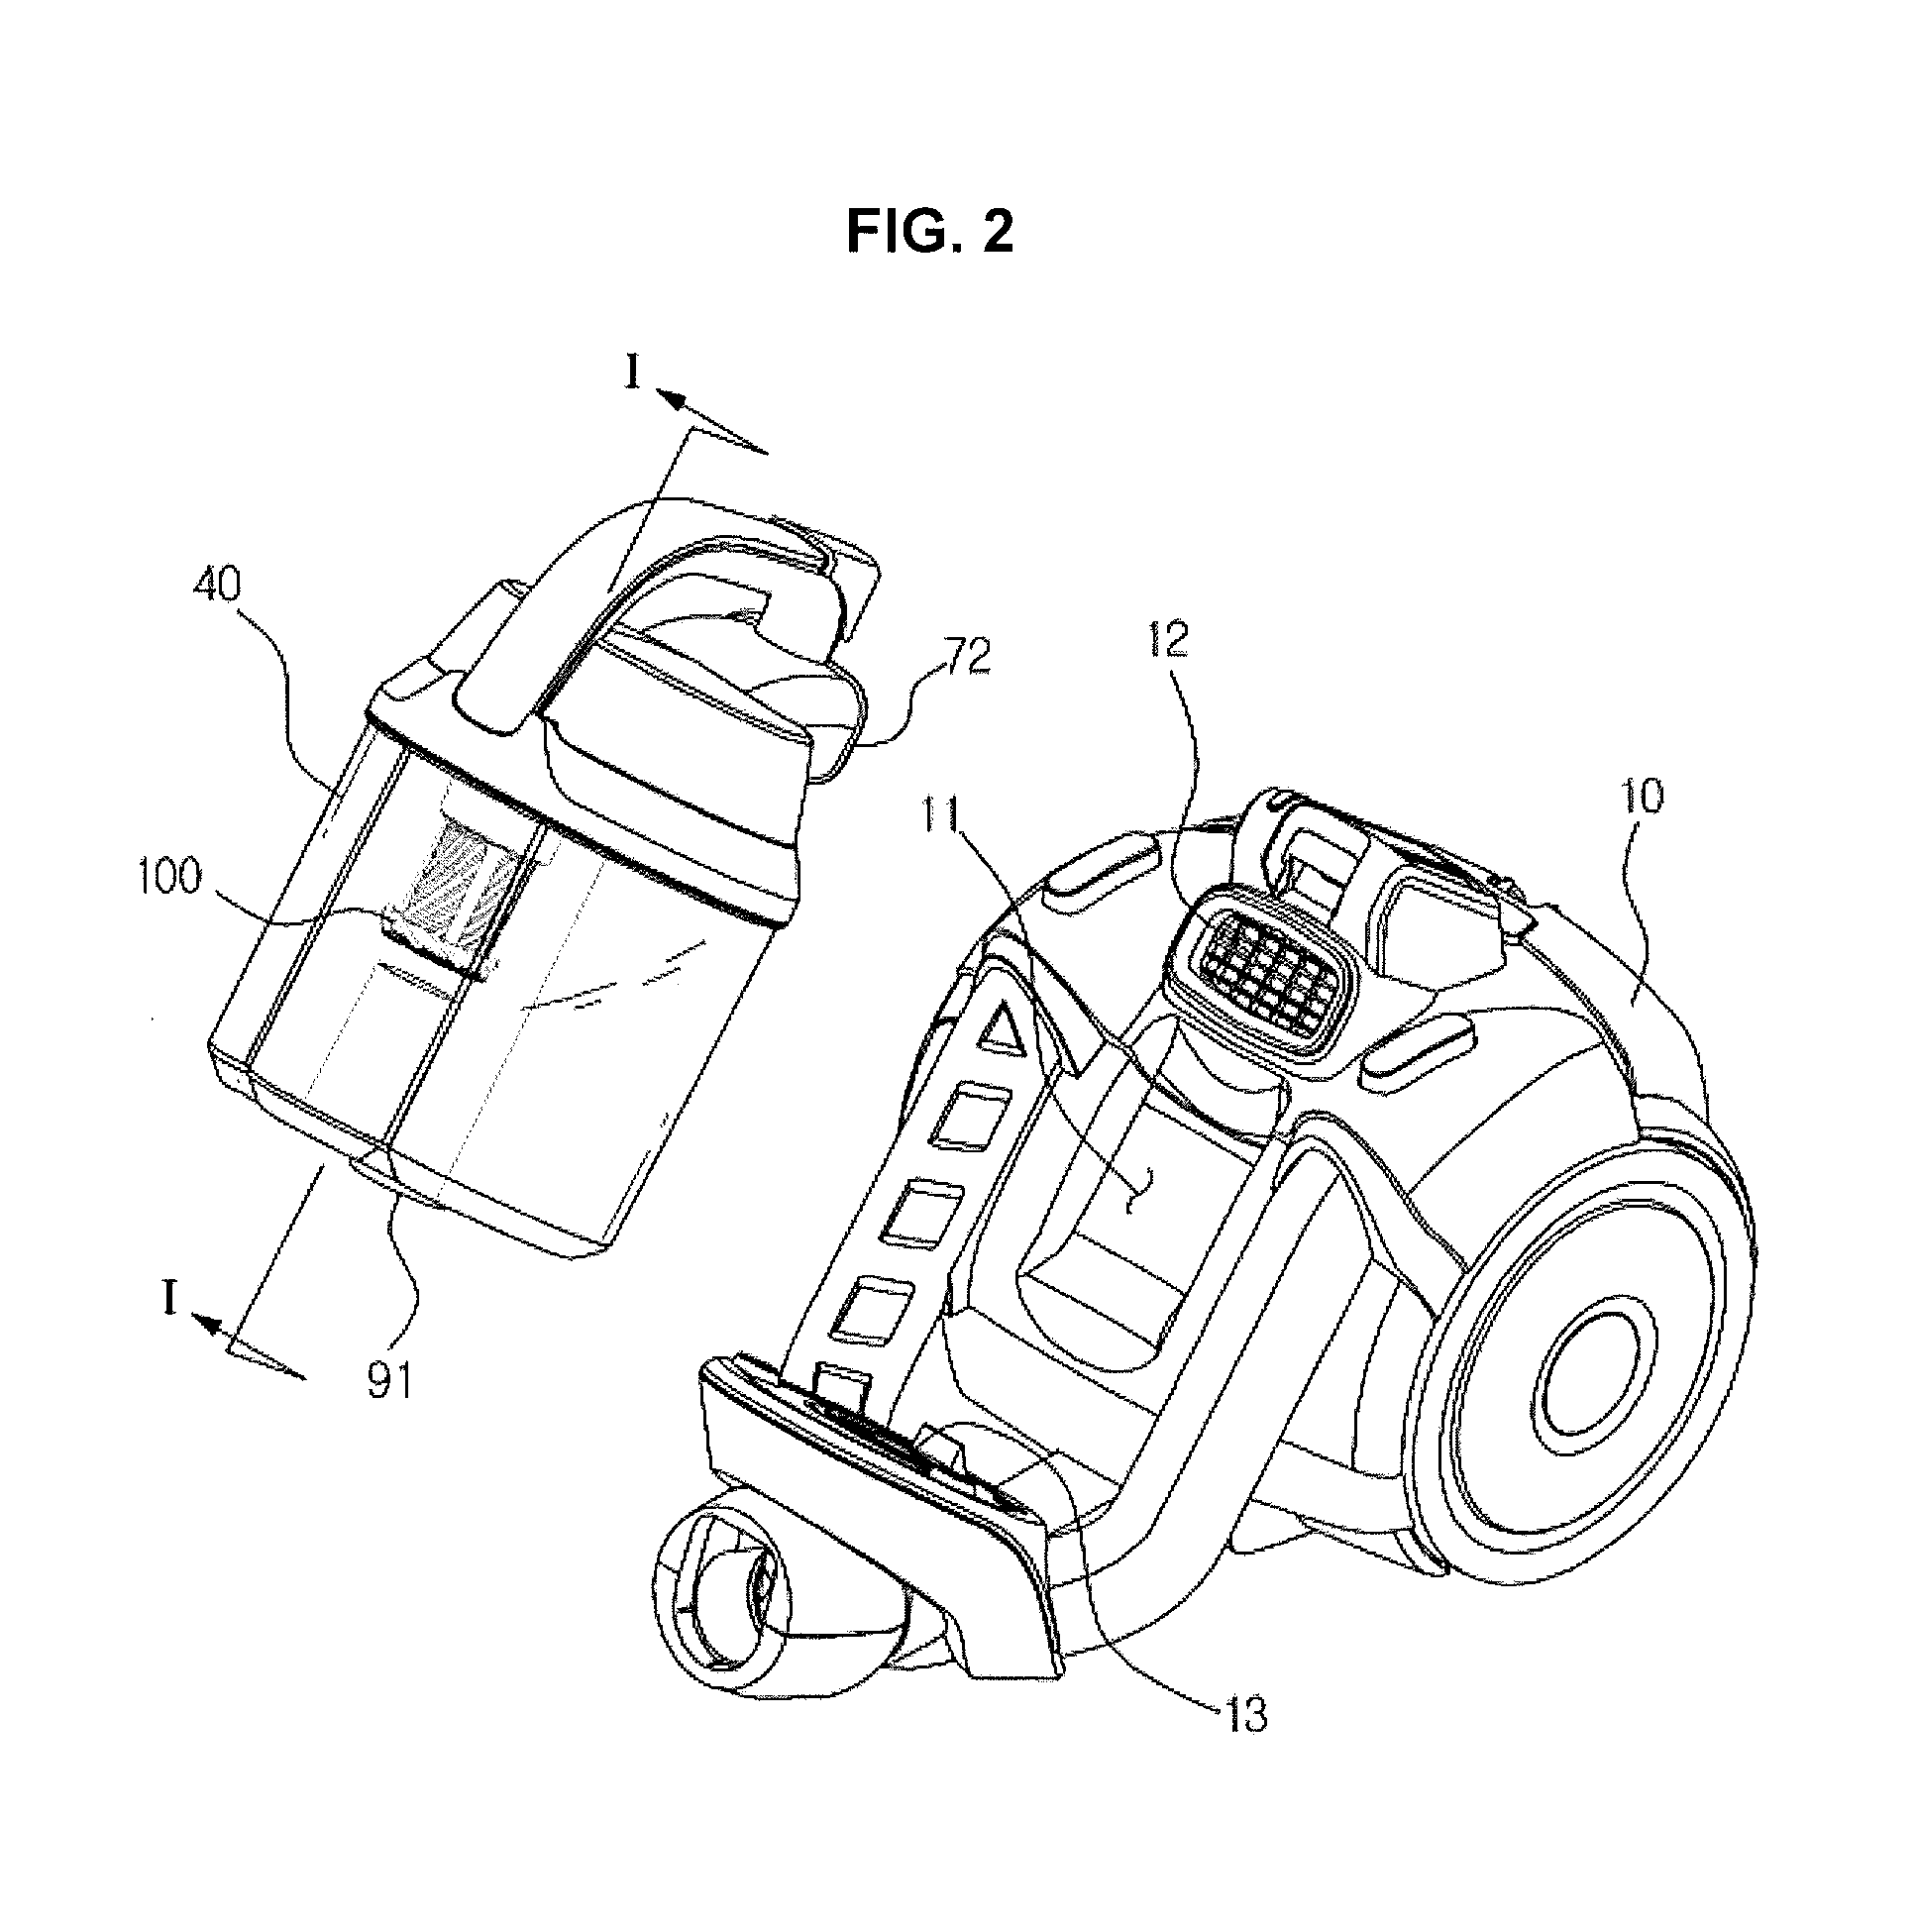 Cyclone dust collector and vacuum cleaner having the same